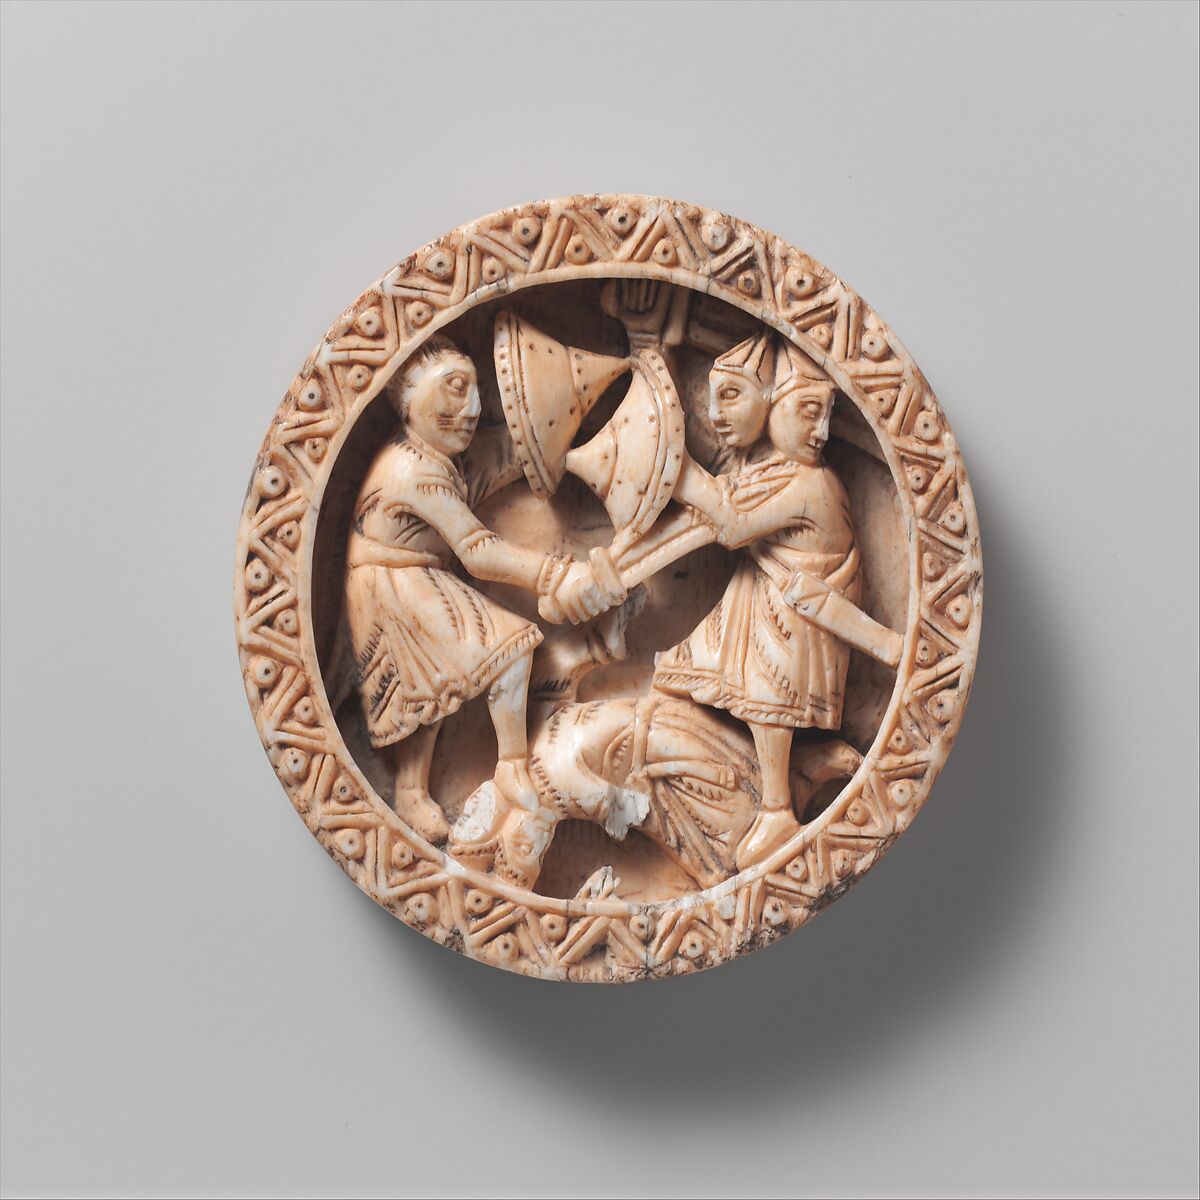 Game Piece with Hercules Slaying the Three-Headed Geryon, Ivory, German 